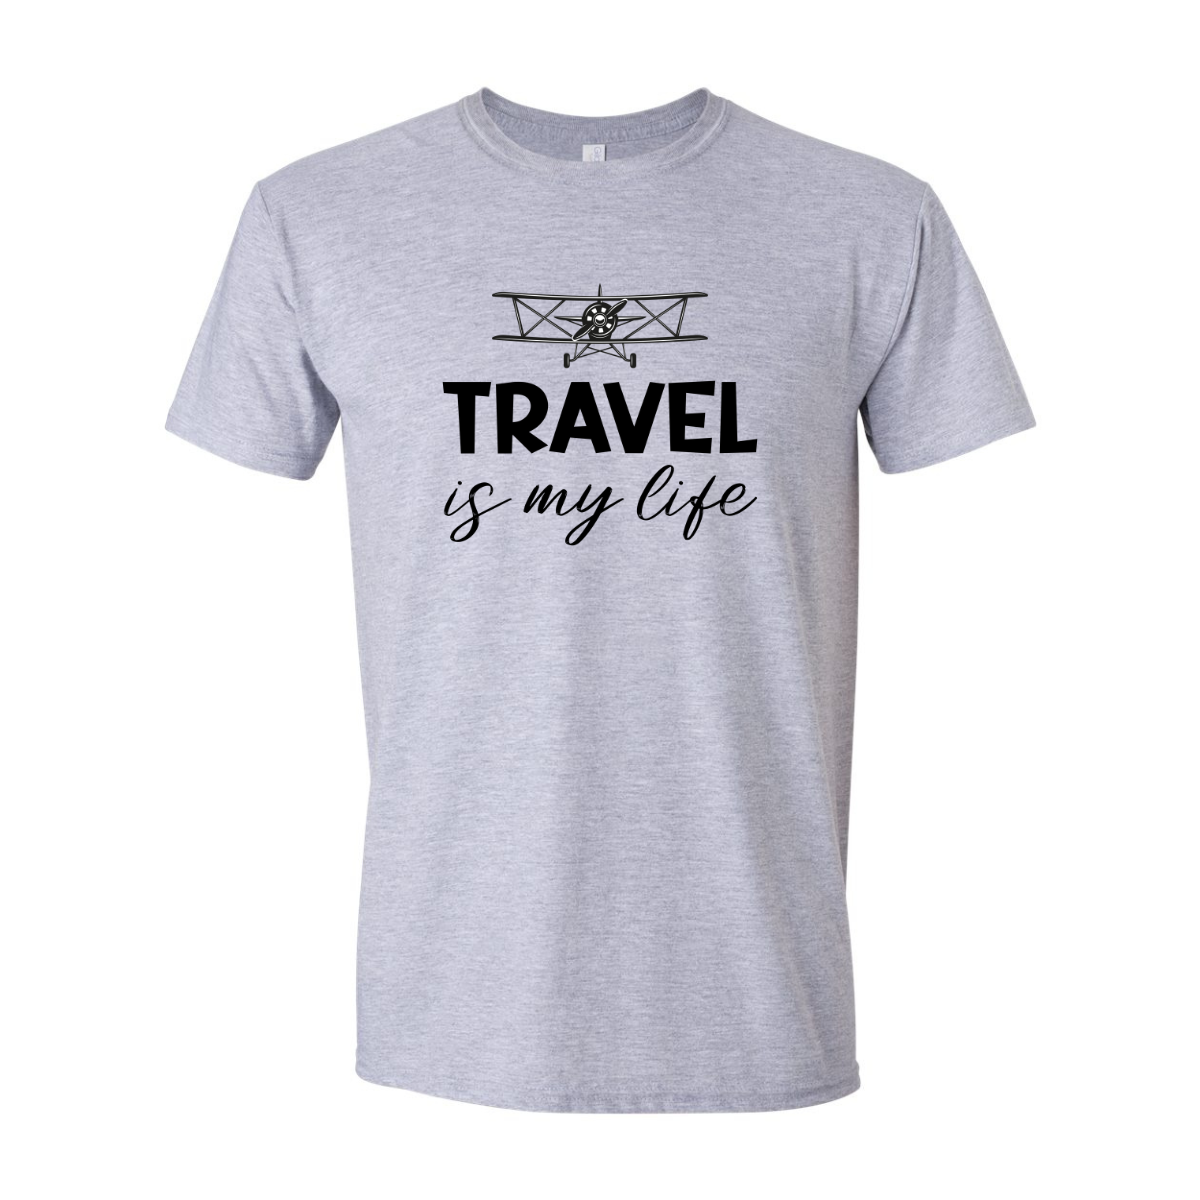 ADULT Unisex T-Shirt TRAA009 TRAVEL IS MY LIFE